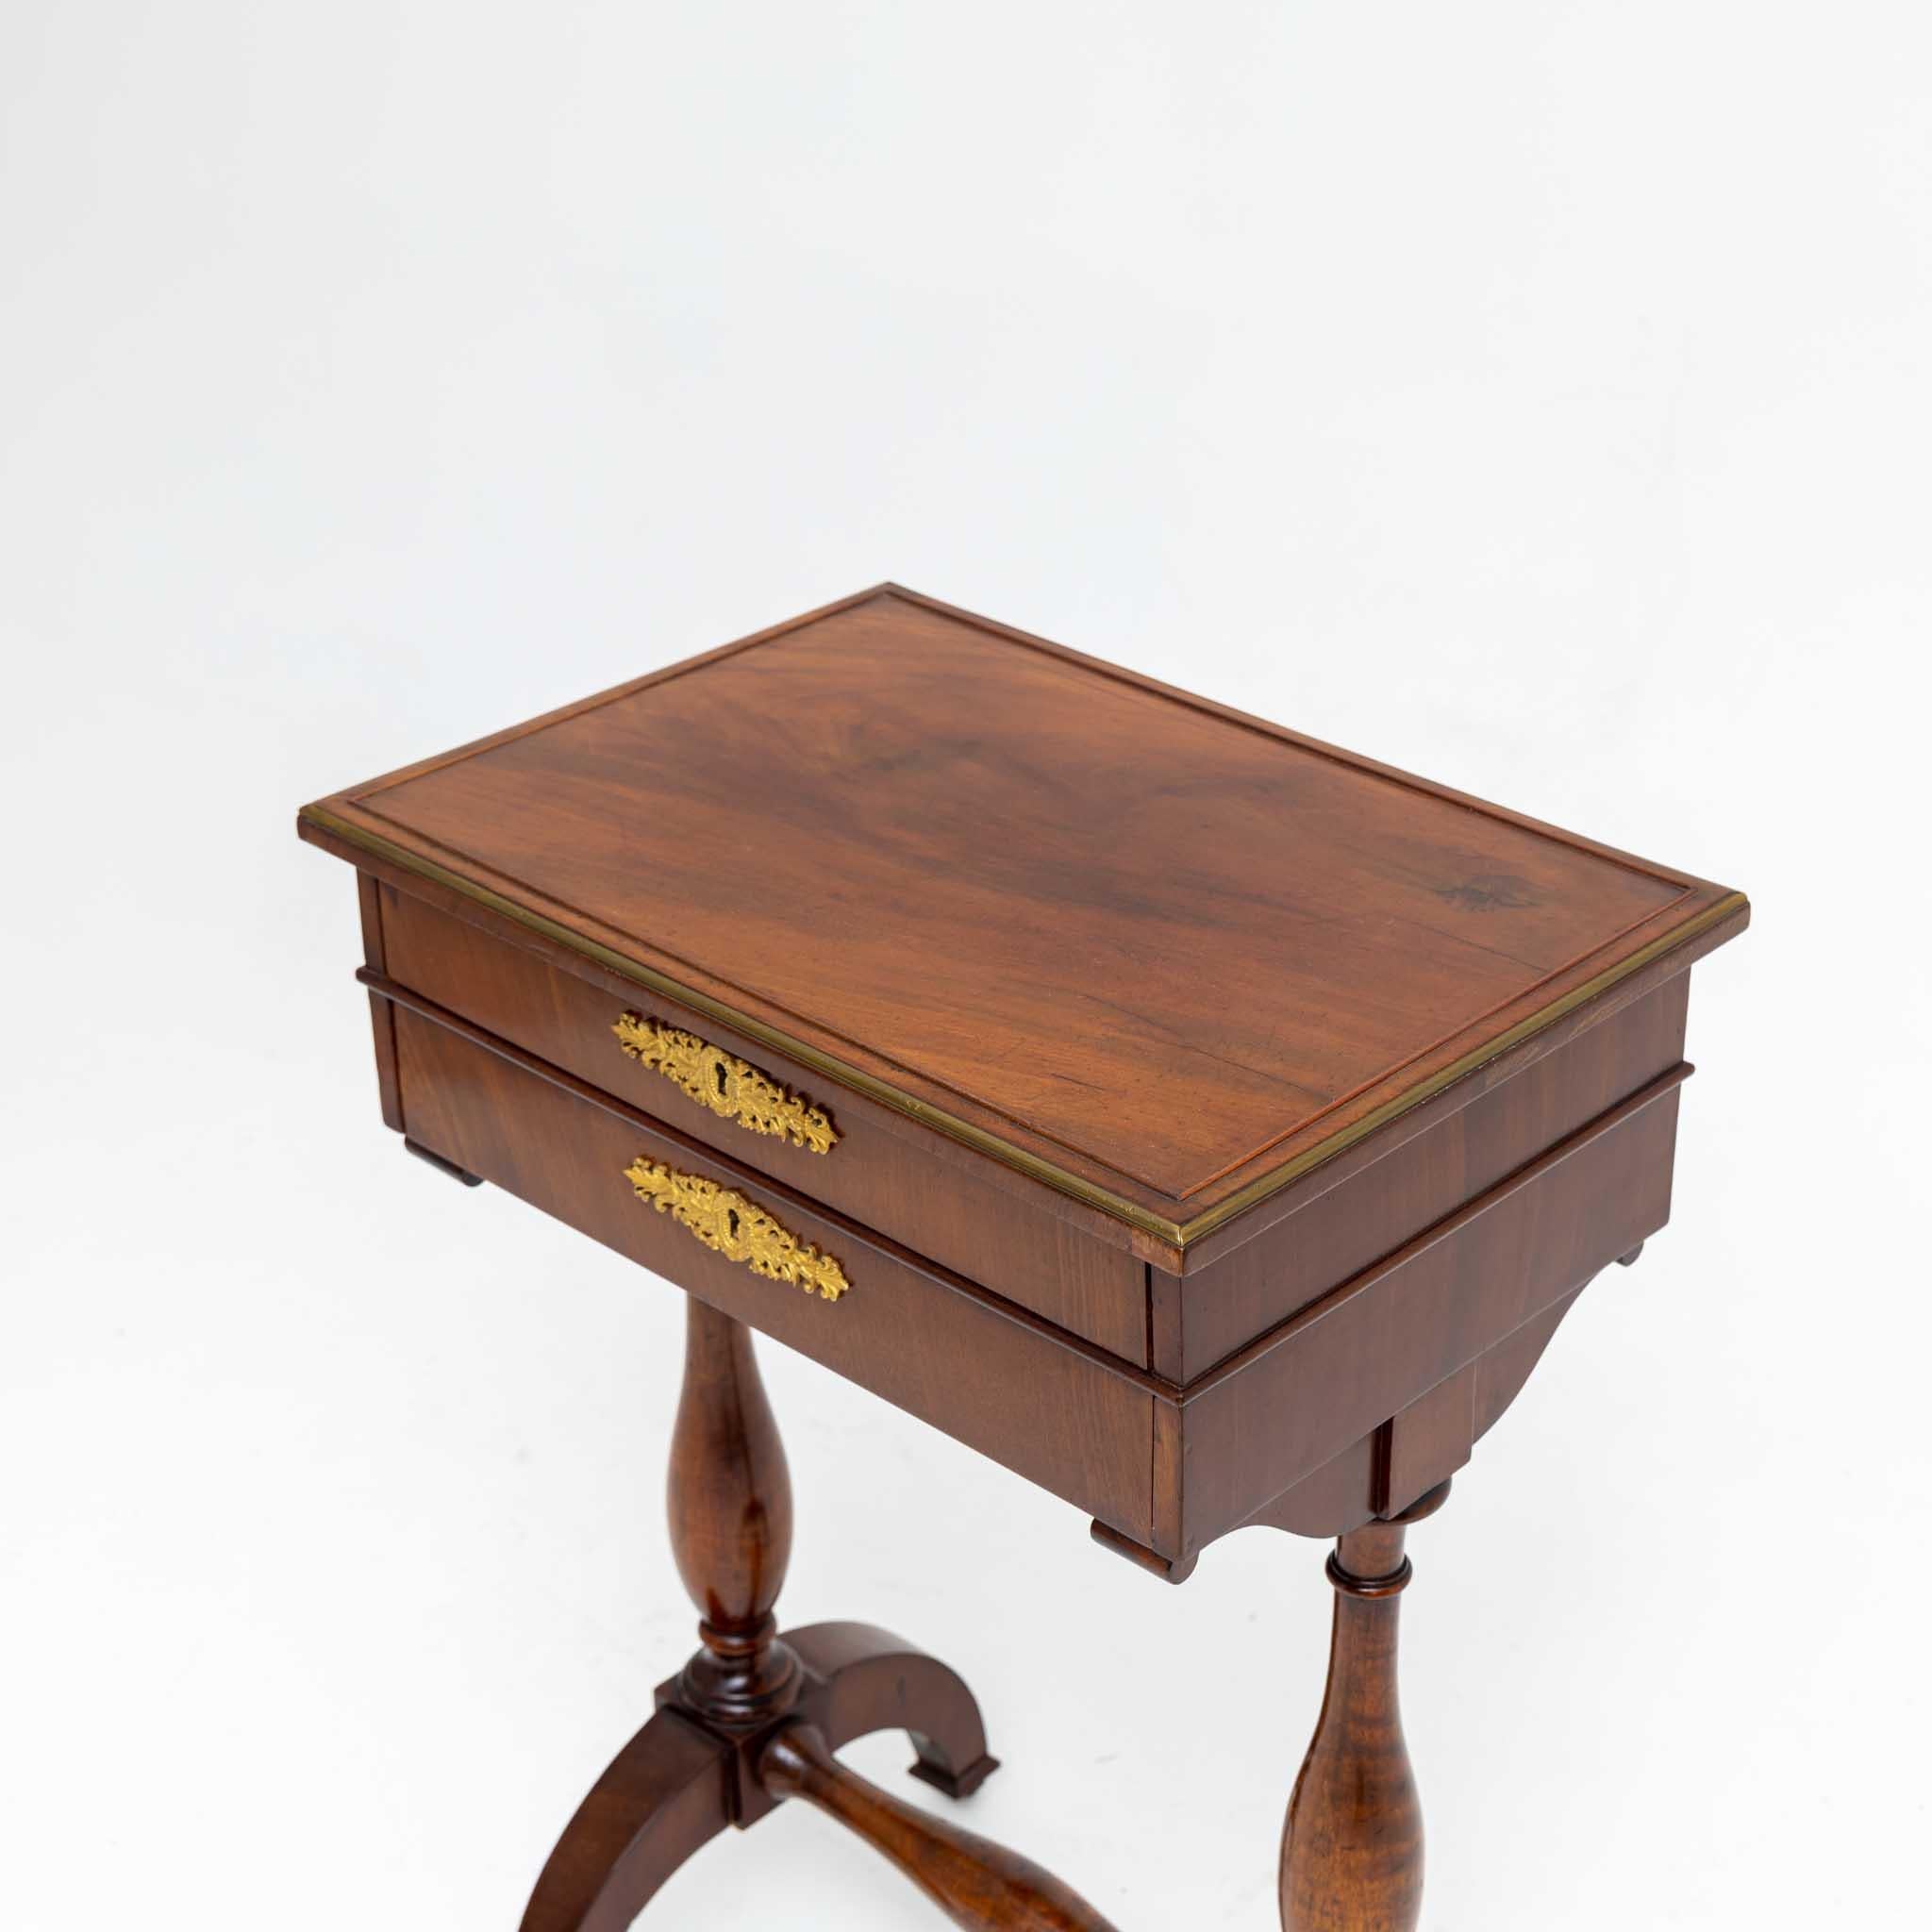 Empire sewing table made of mahogany with two drawers and baluster legs. The sewing table stands on small casters and has an inventory label on the bottom: Jegenstorf Castle No. 00976.